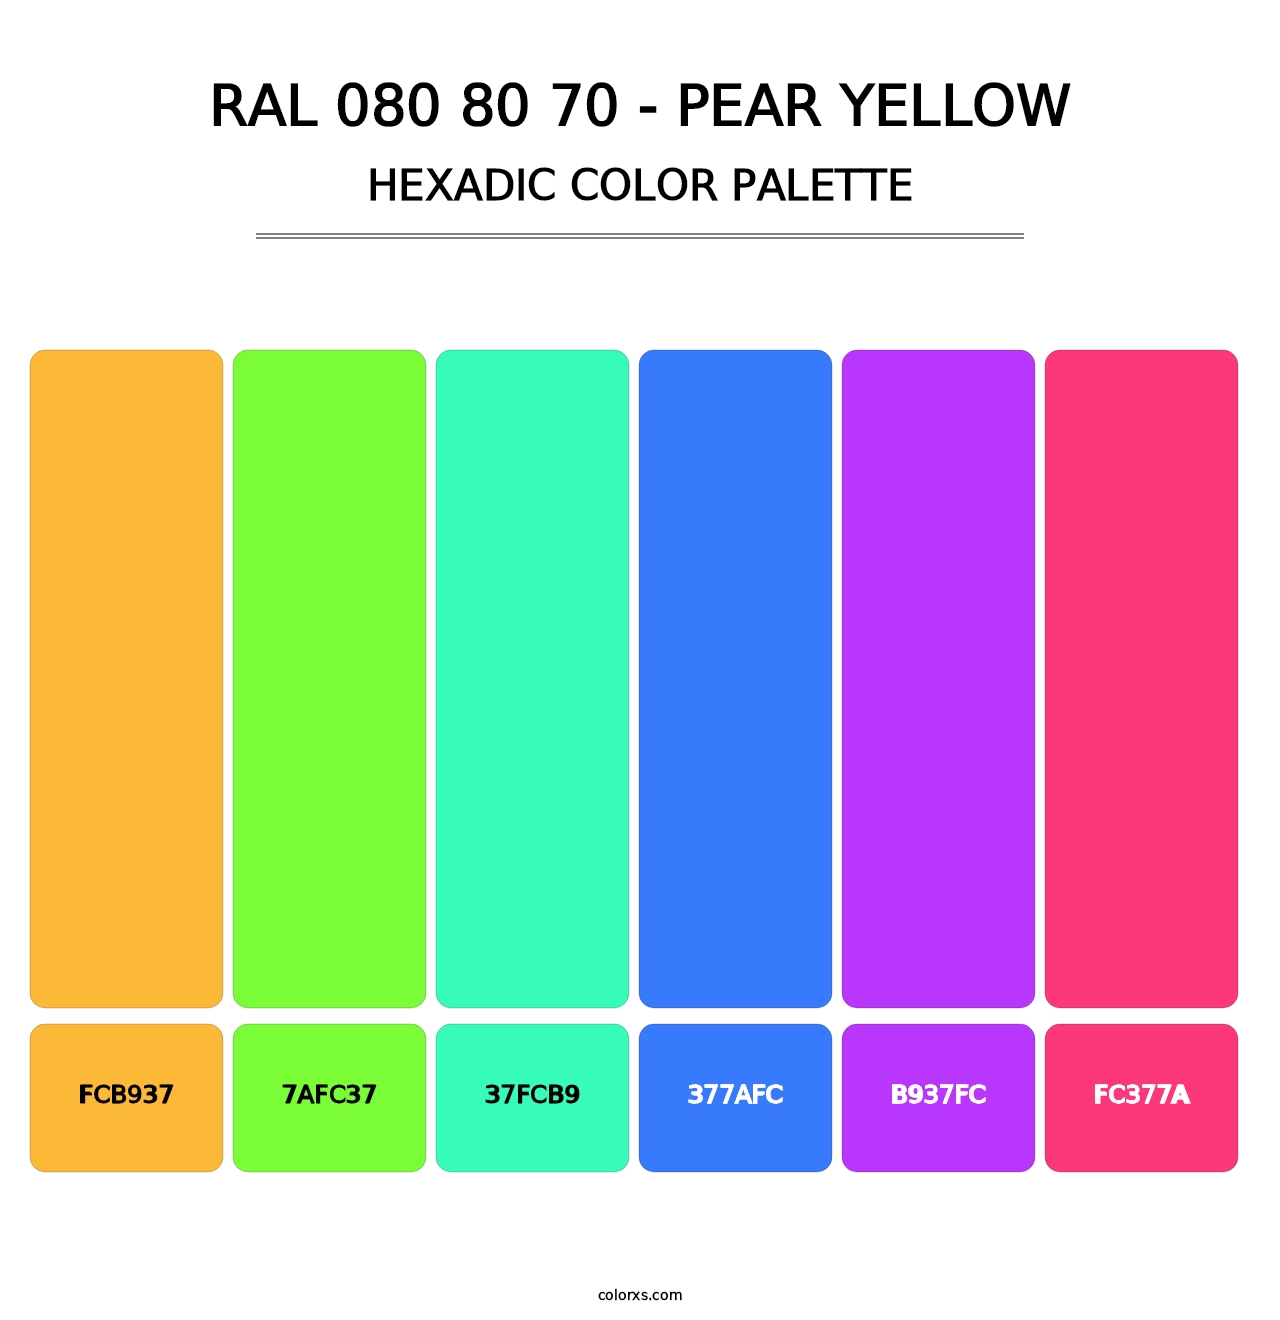 RAL 080 80 70 - Pear Yellow - Hexadic Color Palette